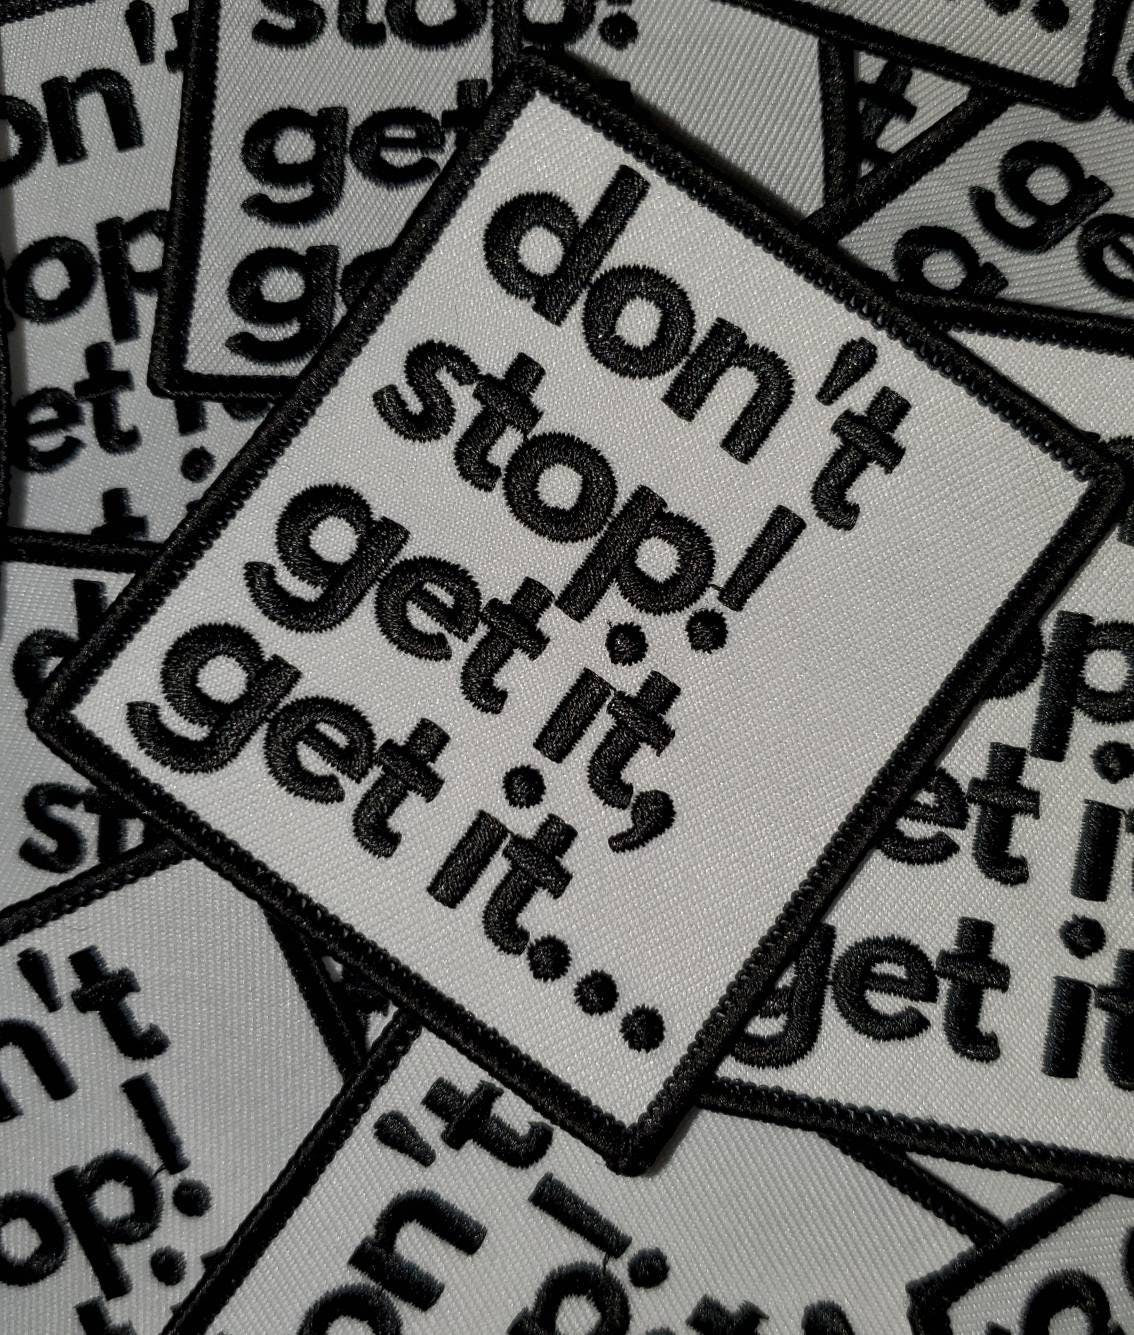 Funny Patch, 1-pc Un, Un, Get Somebody Else To Do It Statement Patch,  Size 3 Circular, Applique for Clothing, Hats, Shoes